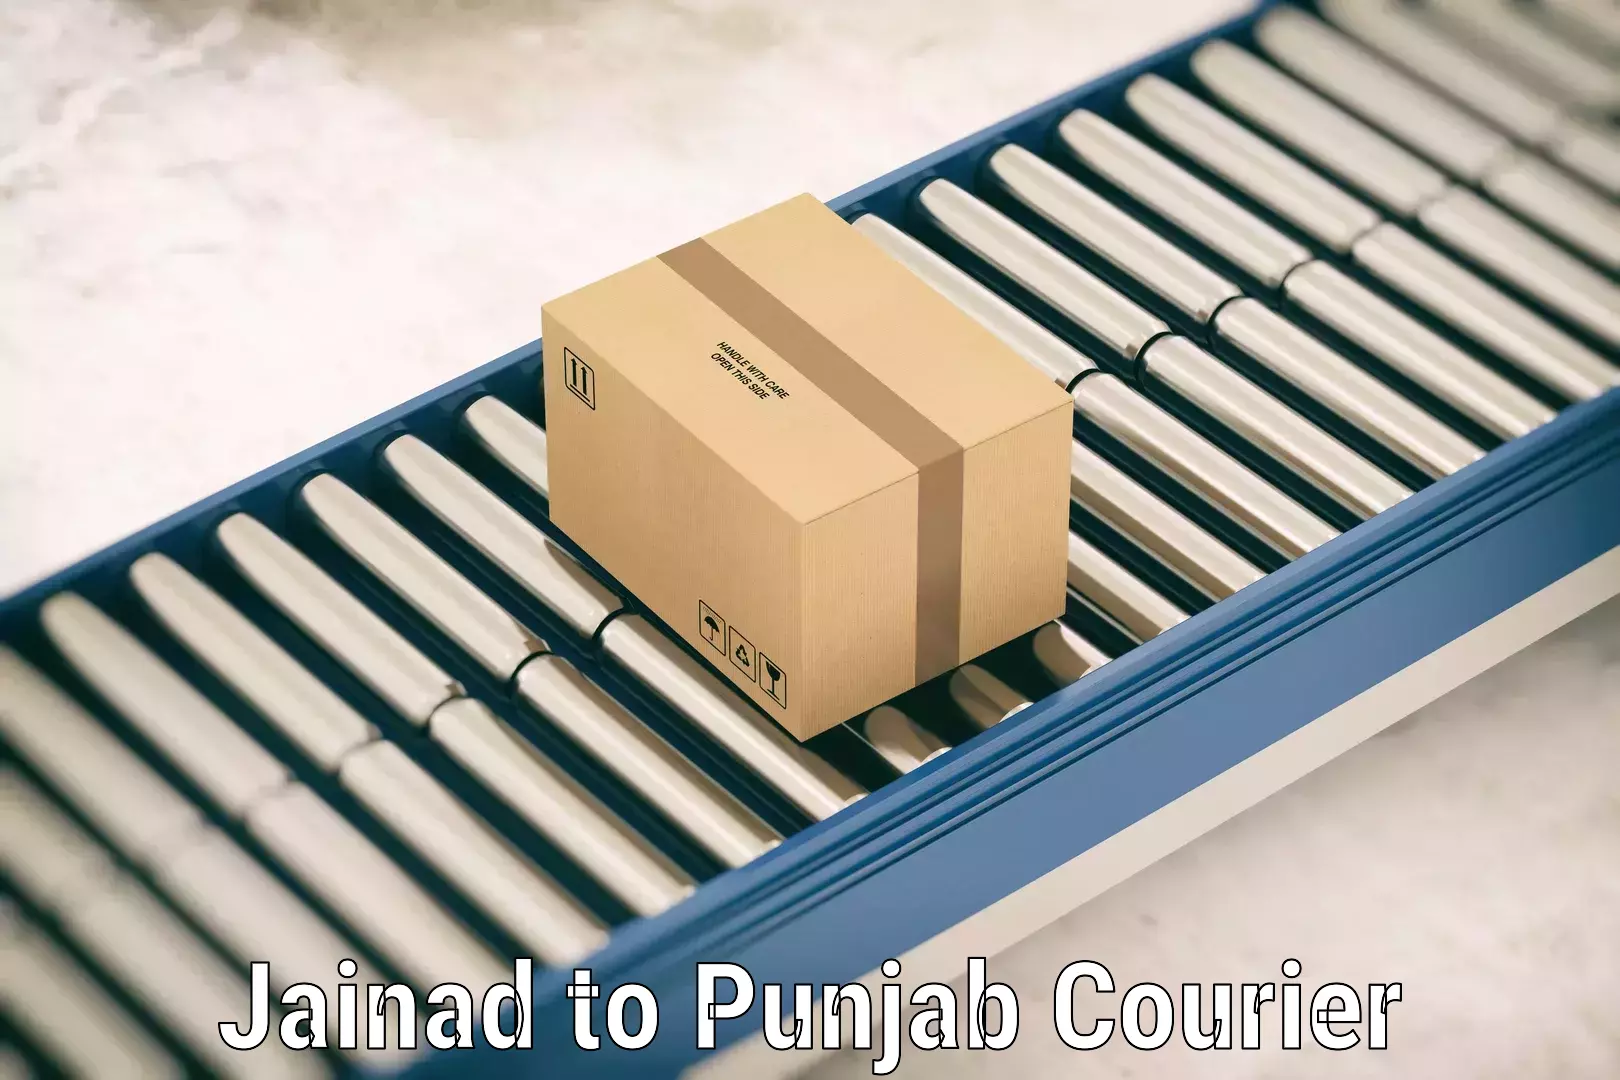 Luggage shipment tracking Jainad to Thapar Institute of Engineering and Technology Patiala